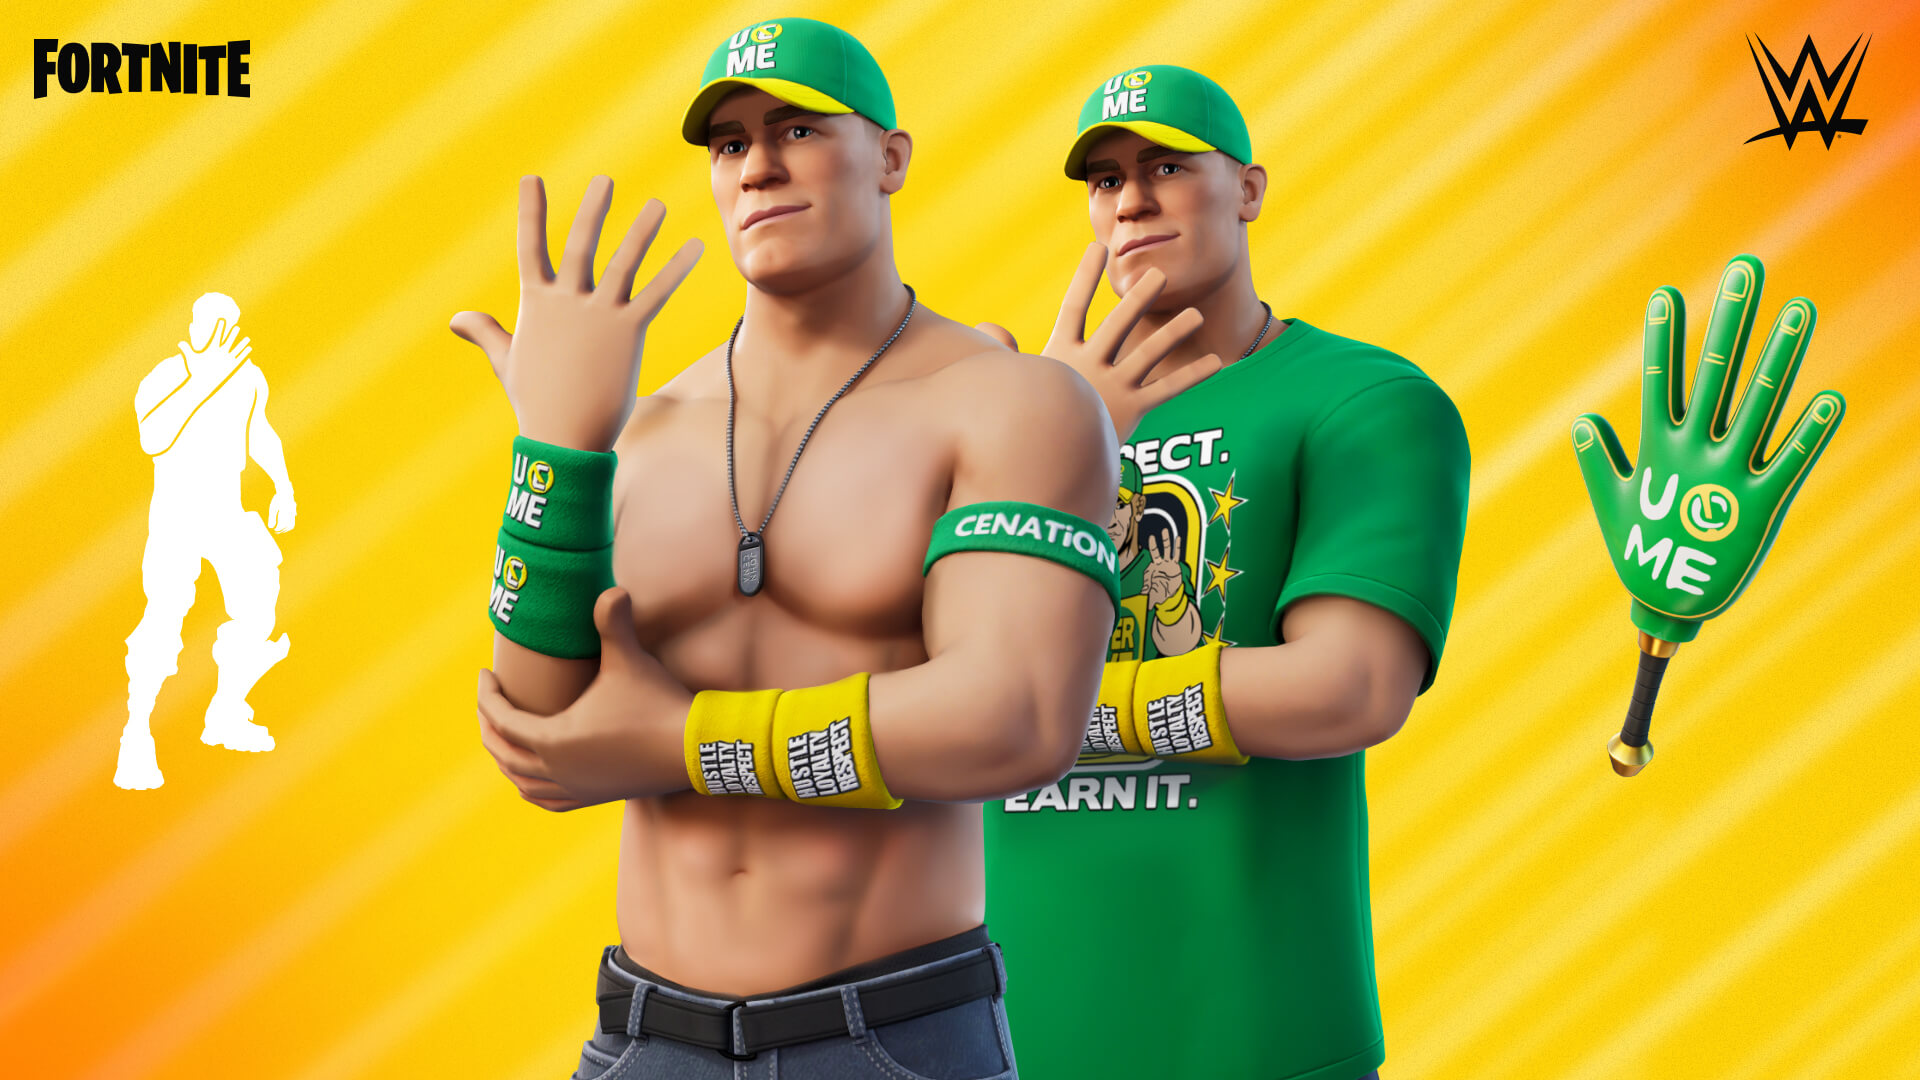 Fortnite is getting a new skin … and his name is John Cena 